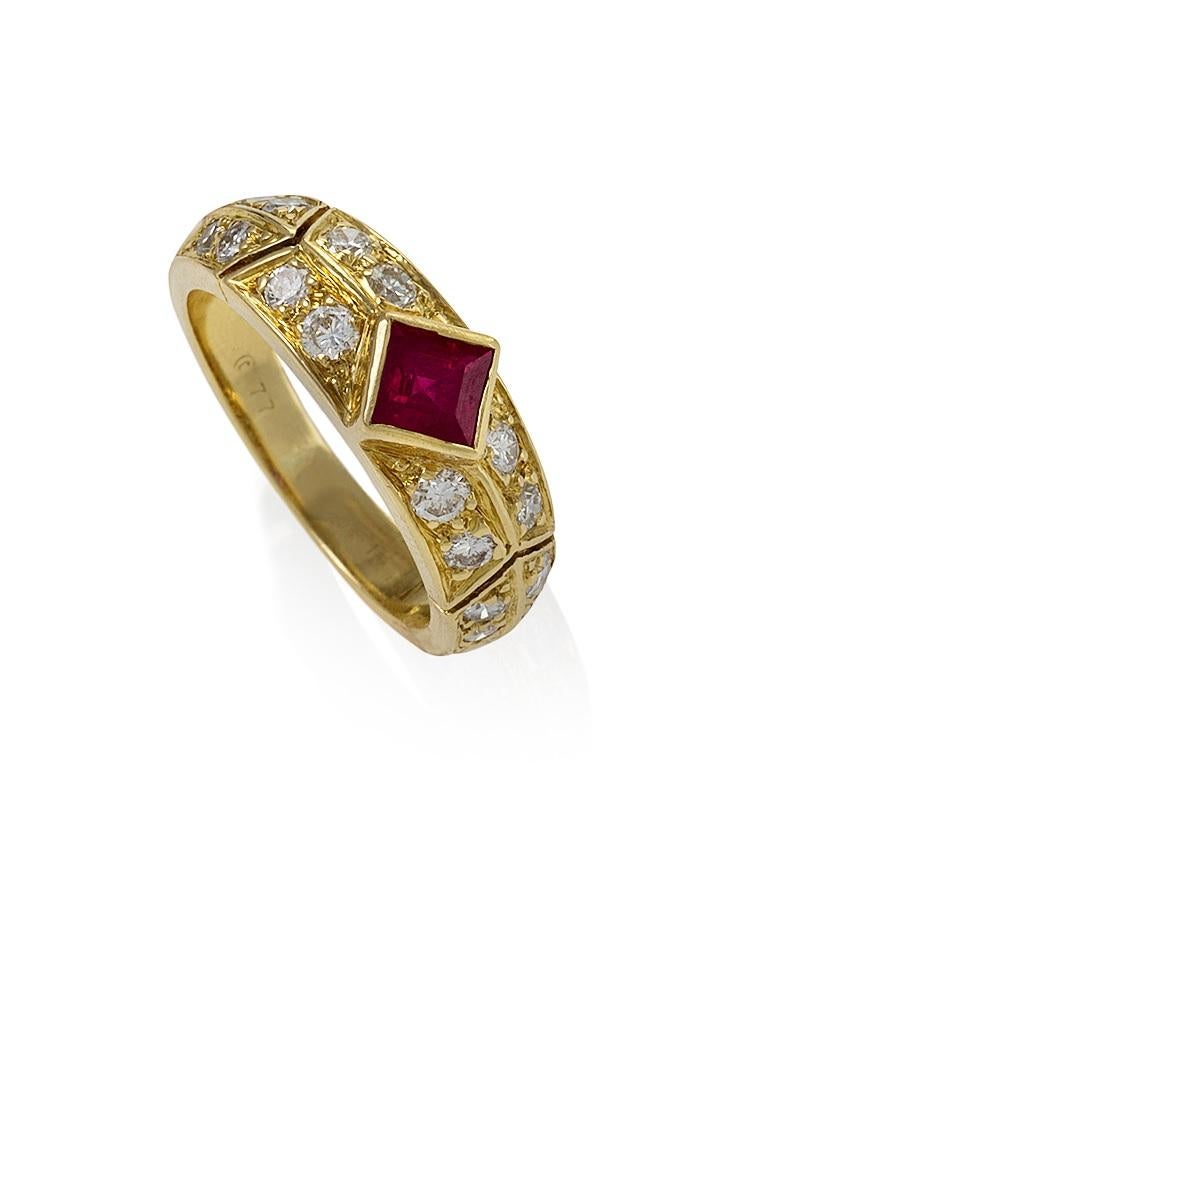 The design of this Van Cleef & Arpels ruby and diamond ring centers on a brilliantly-hued, bezel-set, square-cut ruby. Flanked by diamonds, deep-set into a gold arrow-motif channel, the ring possesses all the totemic power of an ancient gem. The